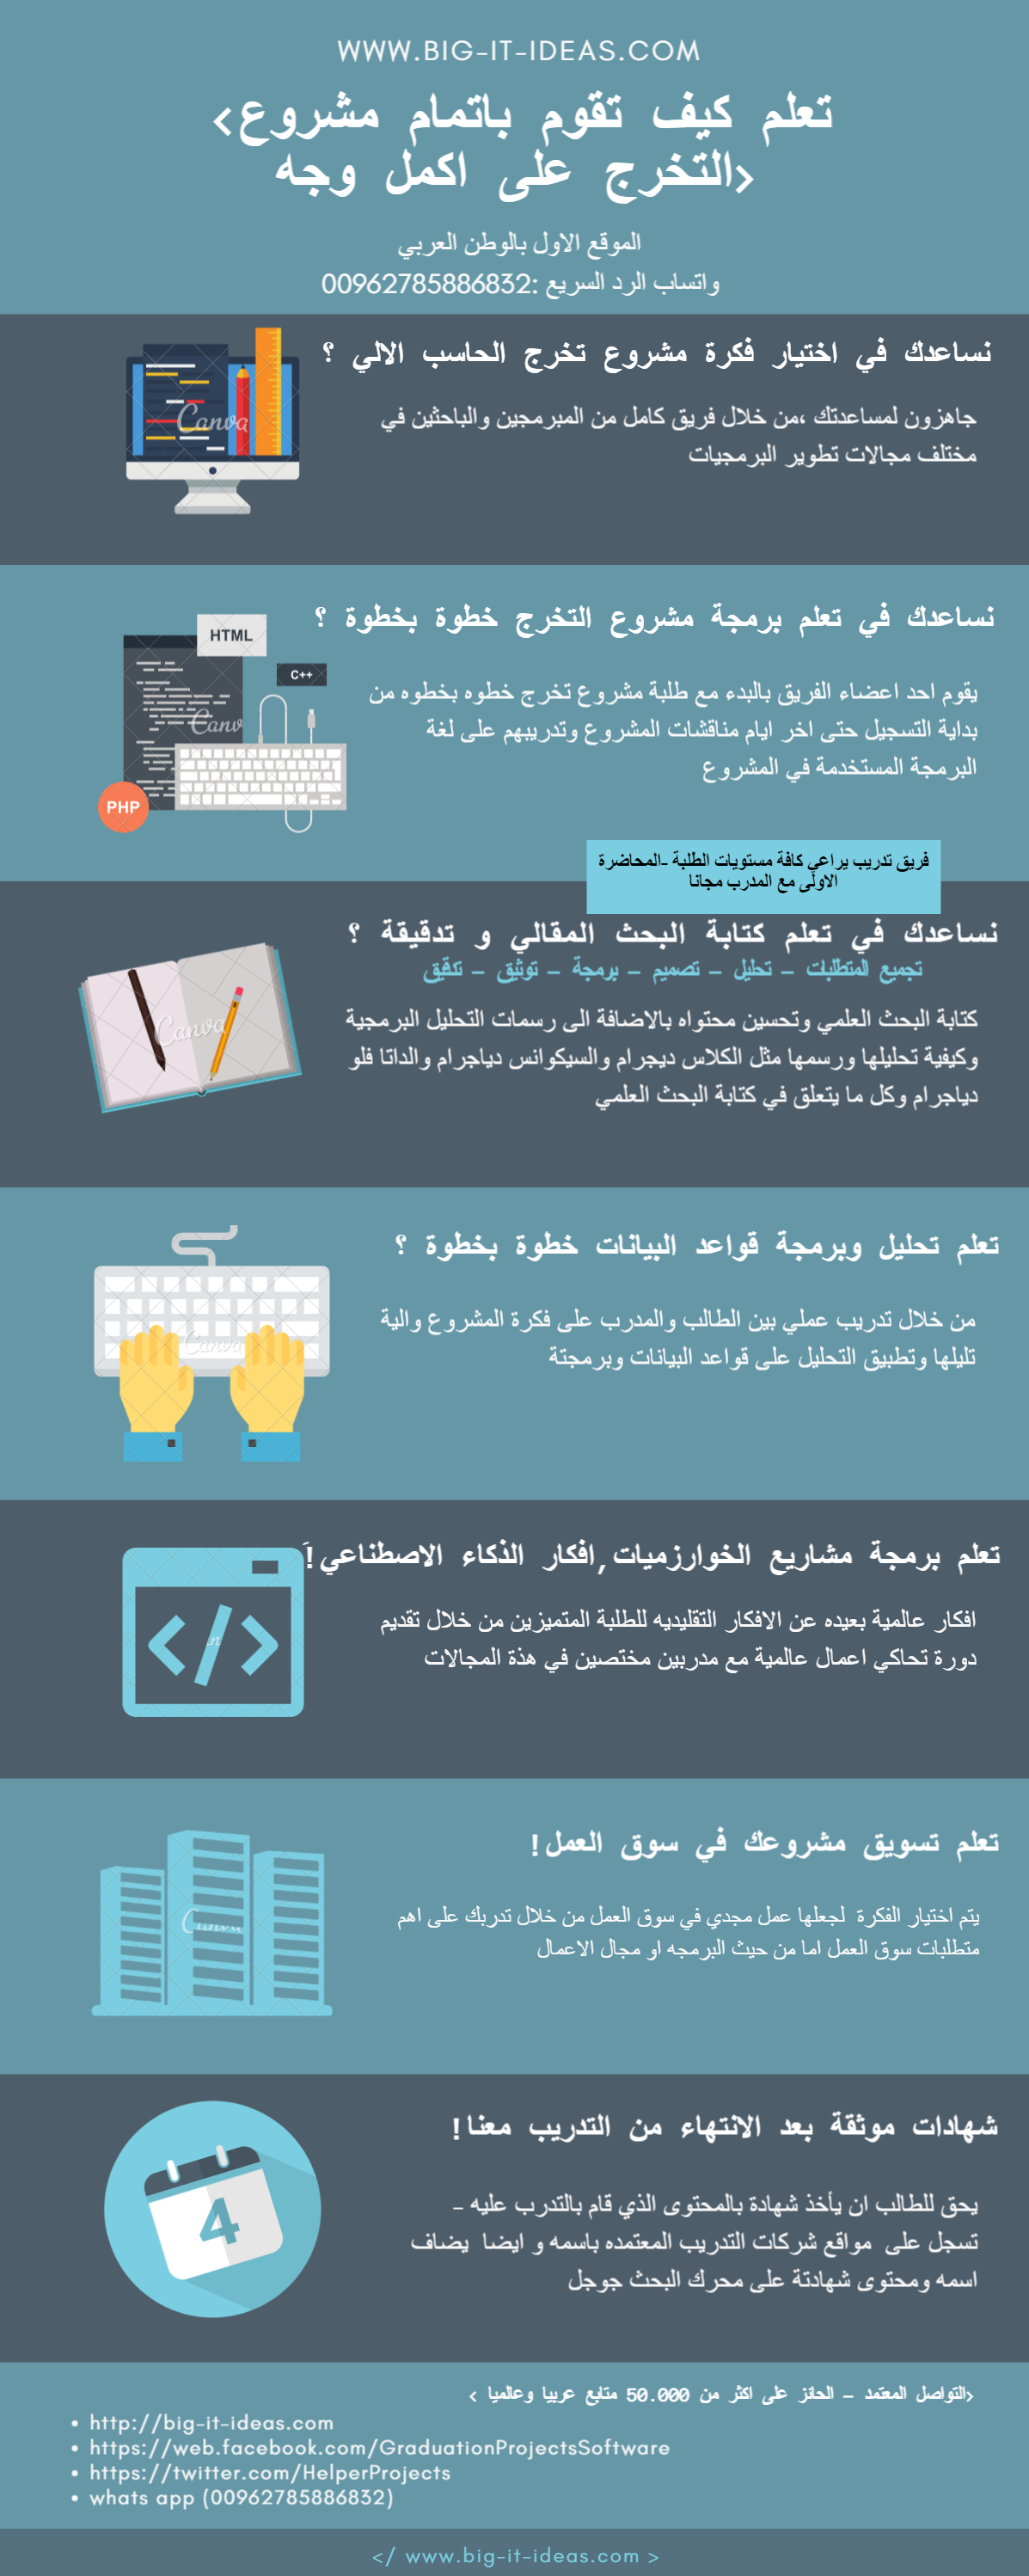 Projects ideas graduation of information technology in 2015 and a new not refined , Projects ideas graduation Computer 2015 Part II , Graduation Projects ideas of Information Technology for the new year 2015 , Graduation Projects ideas C sharp new , Graduation Projects ideas of visual basic VB , graduation projects ideas Java 2015 , graduation projects ideas Android 2015 , Graduation Projects Idea of Artificial Intelligence , Graduation Projects Idea of computer science 2016 , Graduation Projects ideas three-dimensional programs , Over 1000 ideas of a graduation project ,  Graduation Projects Idea of Asp.net , Graduation Projects Computer Information Systems , MATLAB Project Ideas, graduation projects ideas php, Graduation Projects Idea of computer science 2016 , Computer science ideas part 1 in 2016 , Masters and PhD Computer science Ideas , Masters and PhD Computer science Ideas 2016 , Masters and Ph.D software engineering Ideas 2016 , Masters and PhD Computer science Ideas 2016 part A , Graduation Projects ideas to the computer science in 2016 , Graduation Projects ideas of computer science in 2016 FSY , Graduation Projects ideas of mobile applications 2016 , Graduation Projects ideas of software computing students , Draft proposals graduated Information Technology , Graduation Projects Information Technology Ready , Projects ideas graduated Computing and Information Department of Information Systems  , Graduated Projects ideas Computer Information Systems , Projects ideas collection of Computer Science , the ideas of Graduation Projects in computer science in 2016 final study year free part 1Graduation Projects Programming , Projects titles graduated computer , 100 Creative project idea graduated computer science , Innovative computer graduation projects in 2016